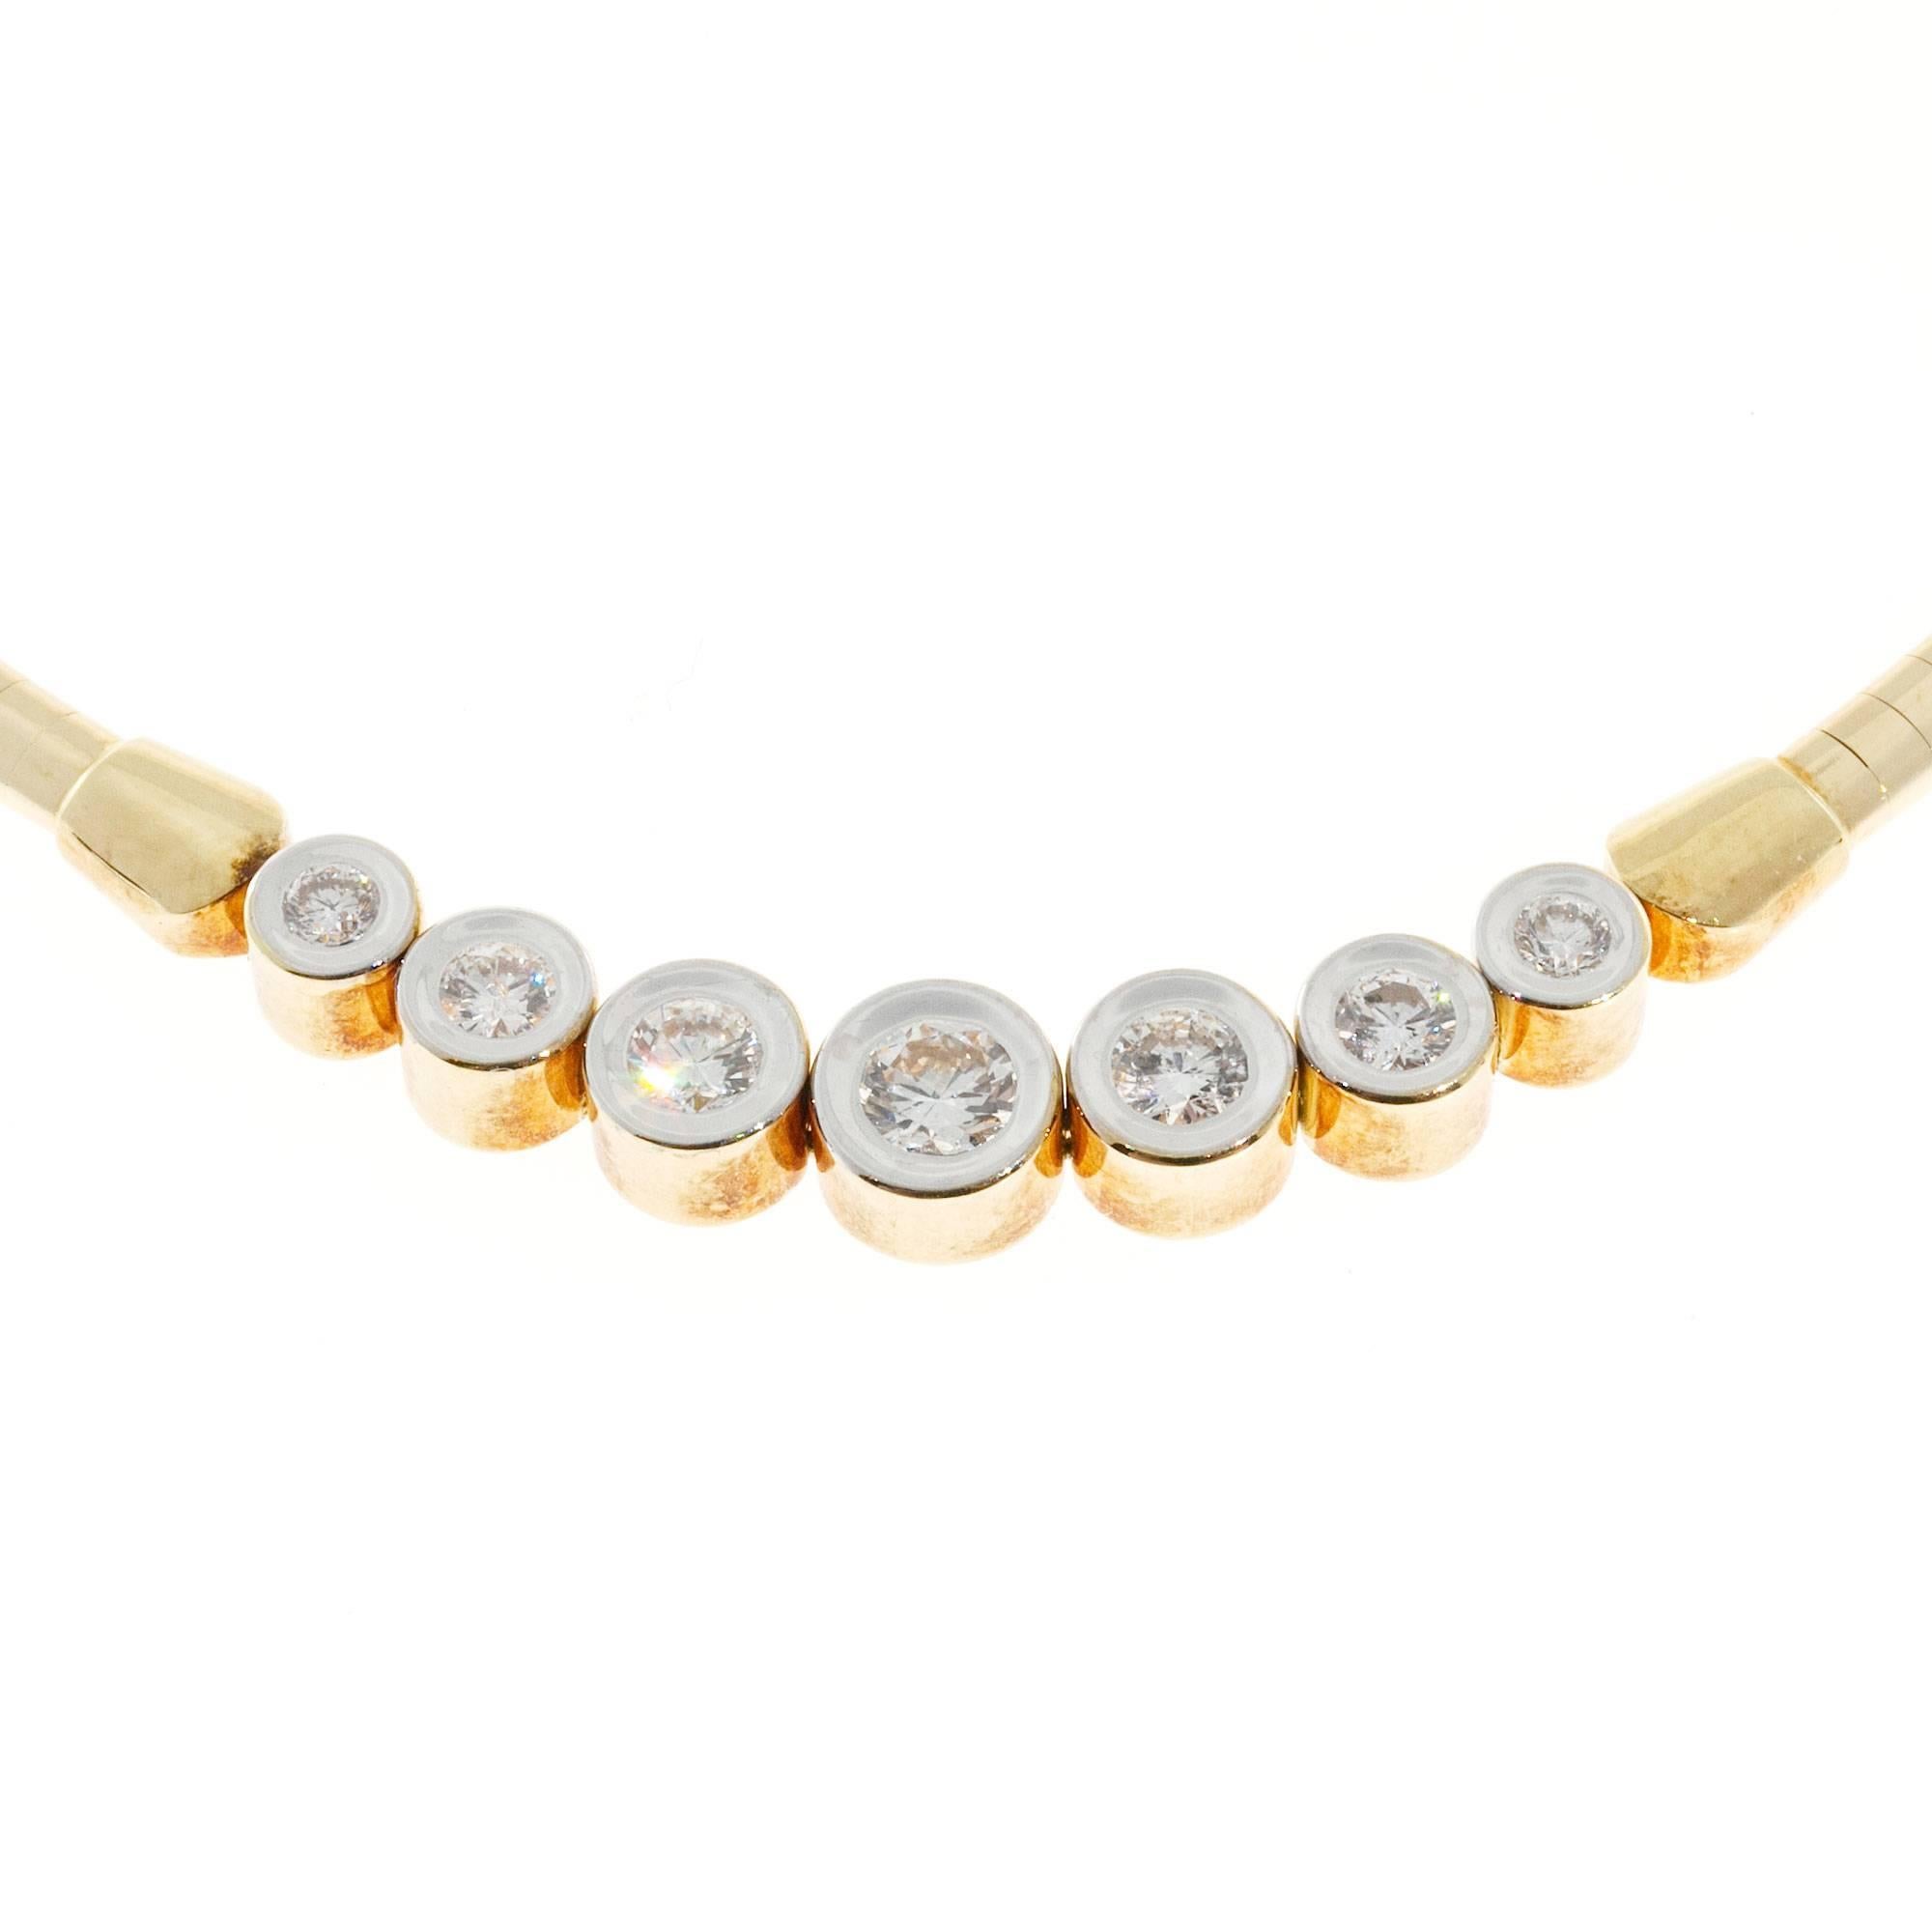 Domed 3mm 14k yellow gold omega chain with nice end caps and 7 hinged graduated tubes each set with a full cut diamond in a white gold top.

7 round diamonds approx. total weight .87cts, G, VS2-SI
14k yellow & white Gold
Stamped: 14k Italy
23.6